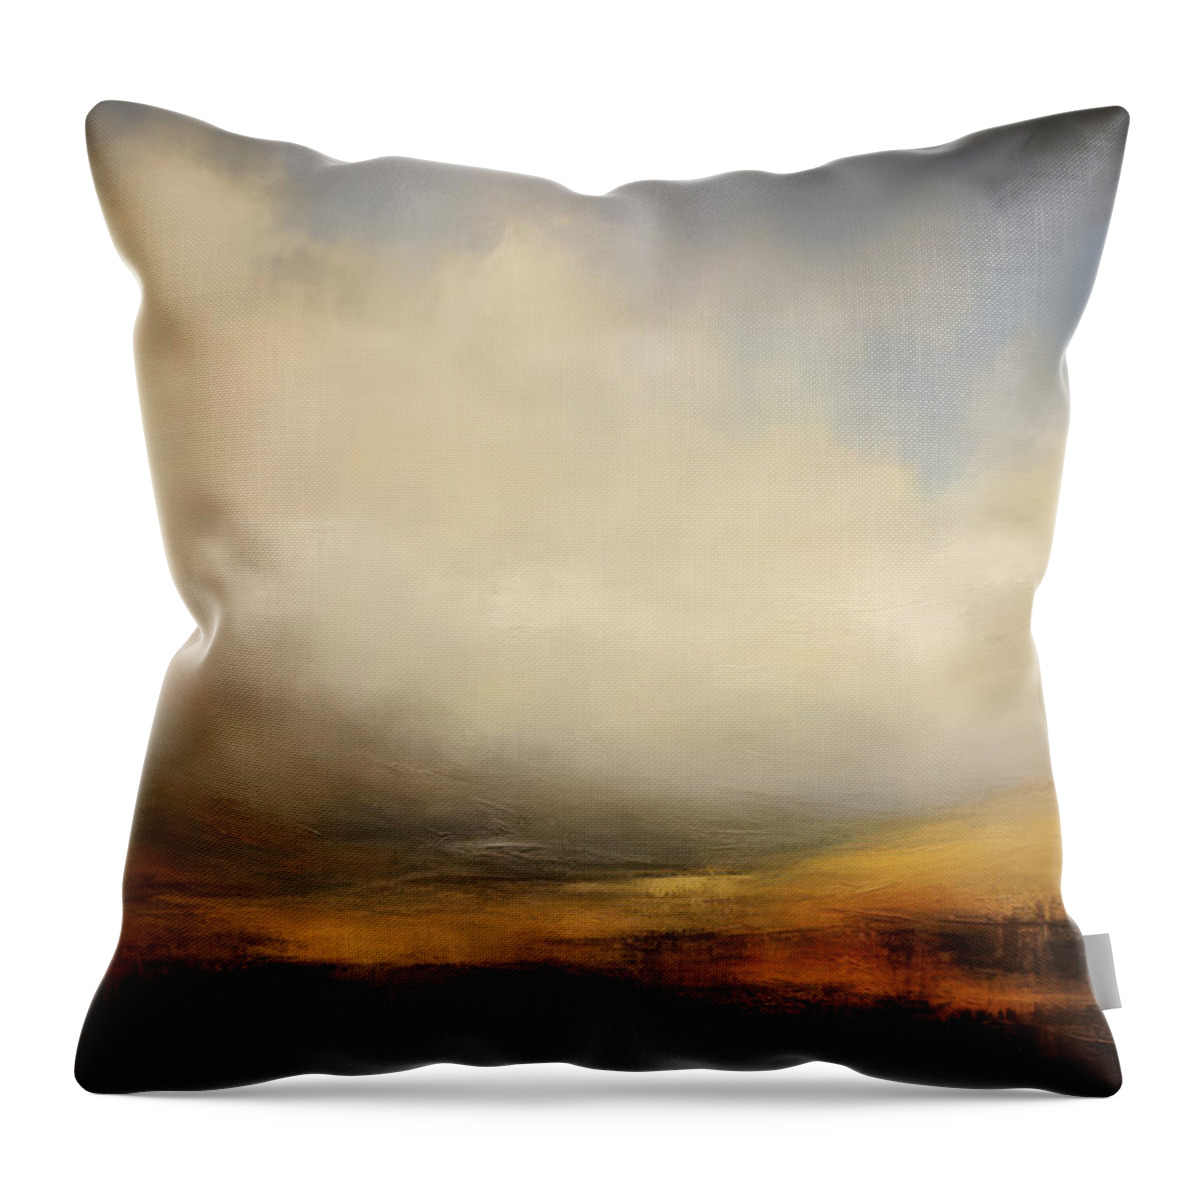 Wide Open Spaces Throw Pillow featuring the painting Wide Open Spaces Desert Dreams 9 by Jai Johnson